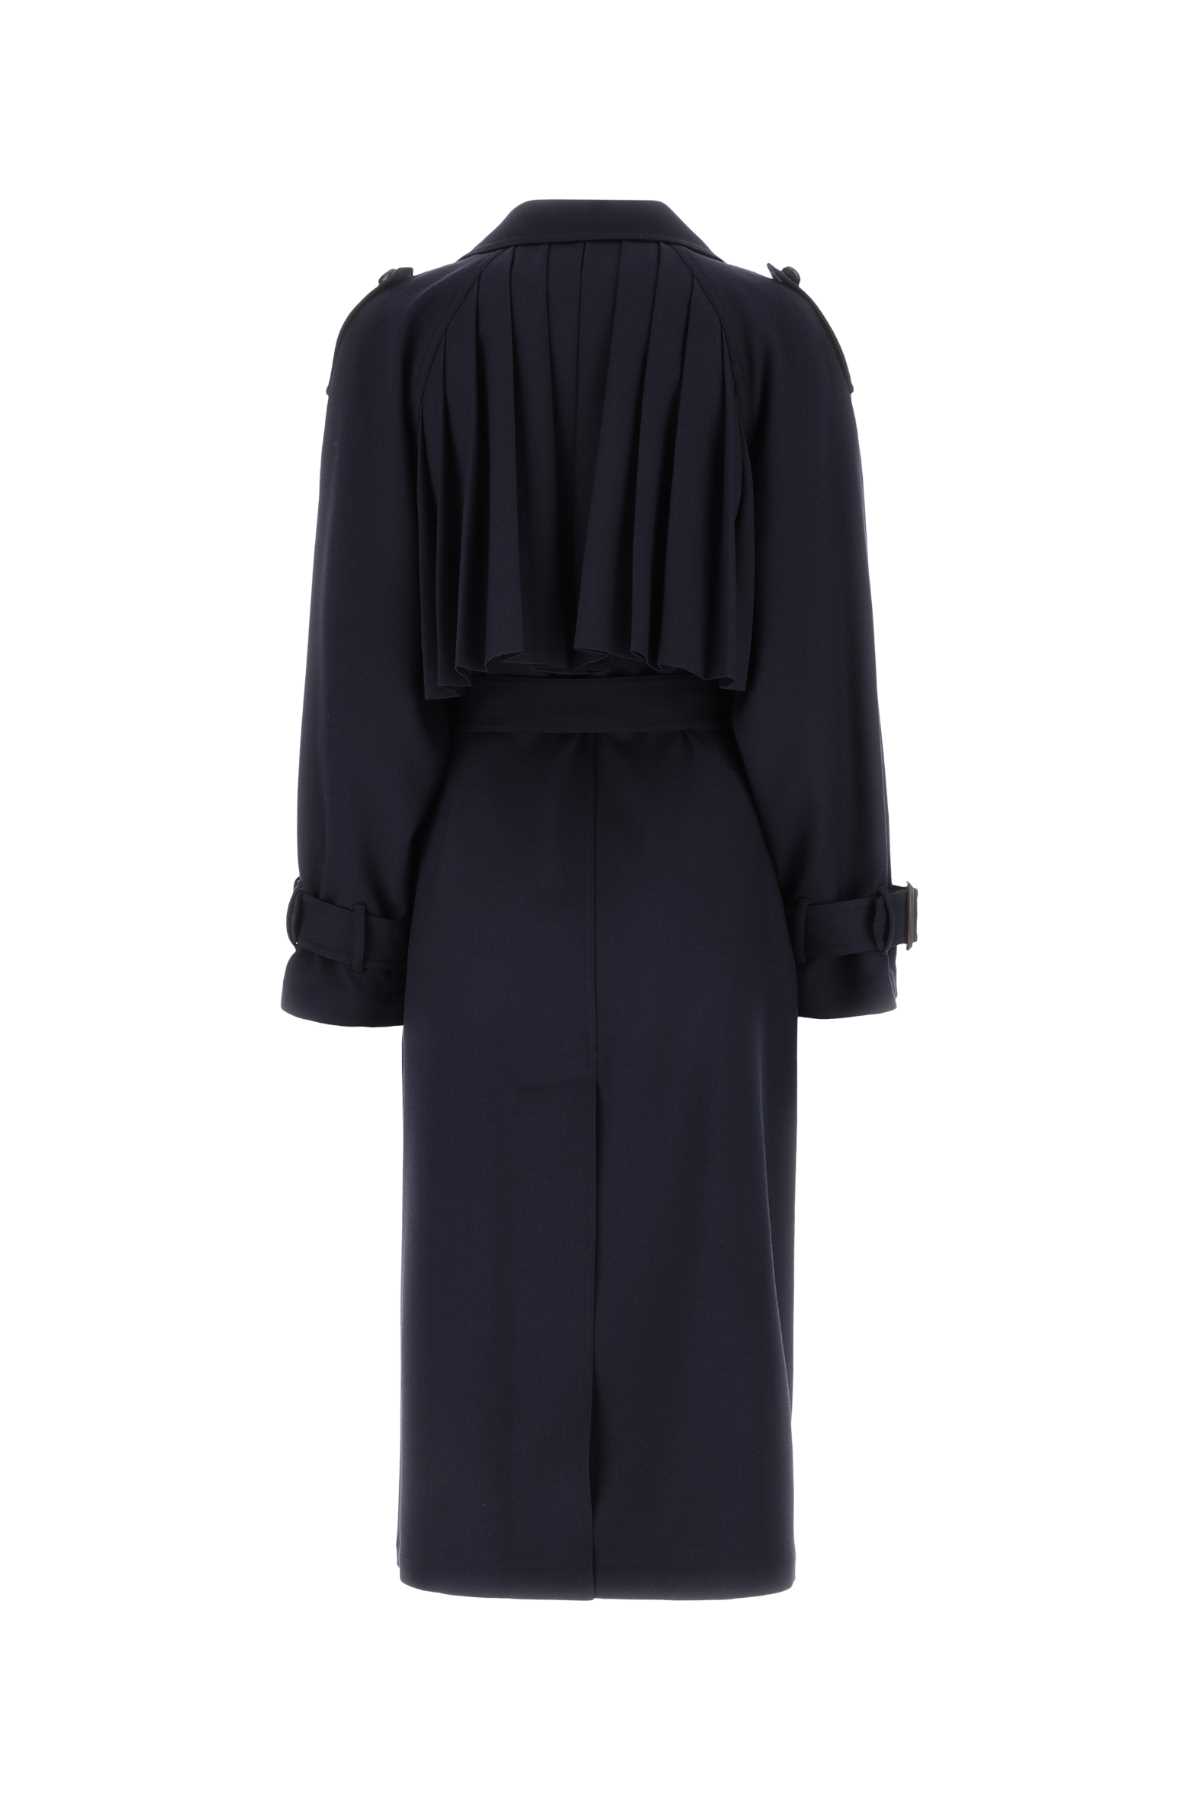 Shop Gucci Navy Blue Wool Trench Coat